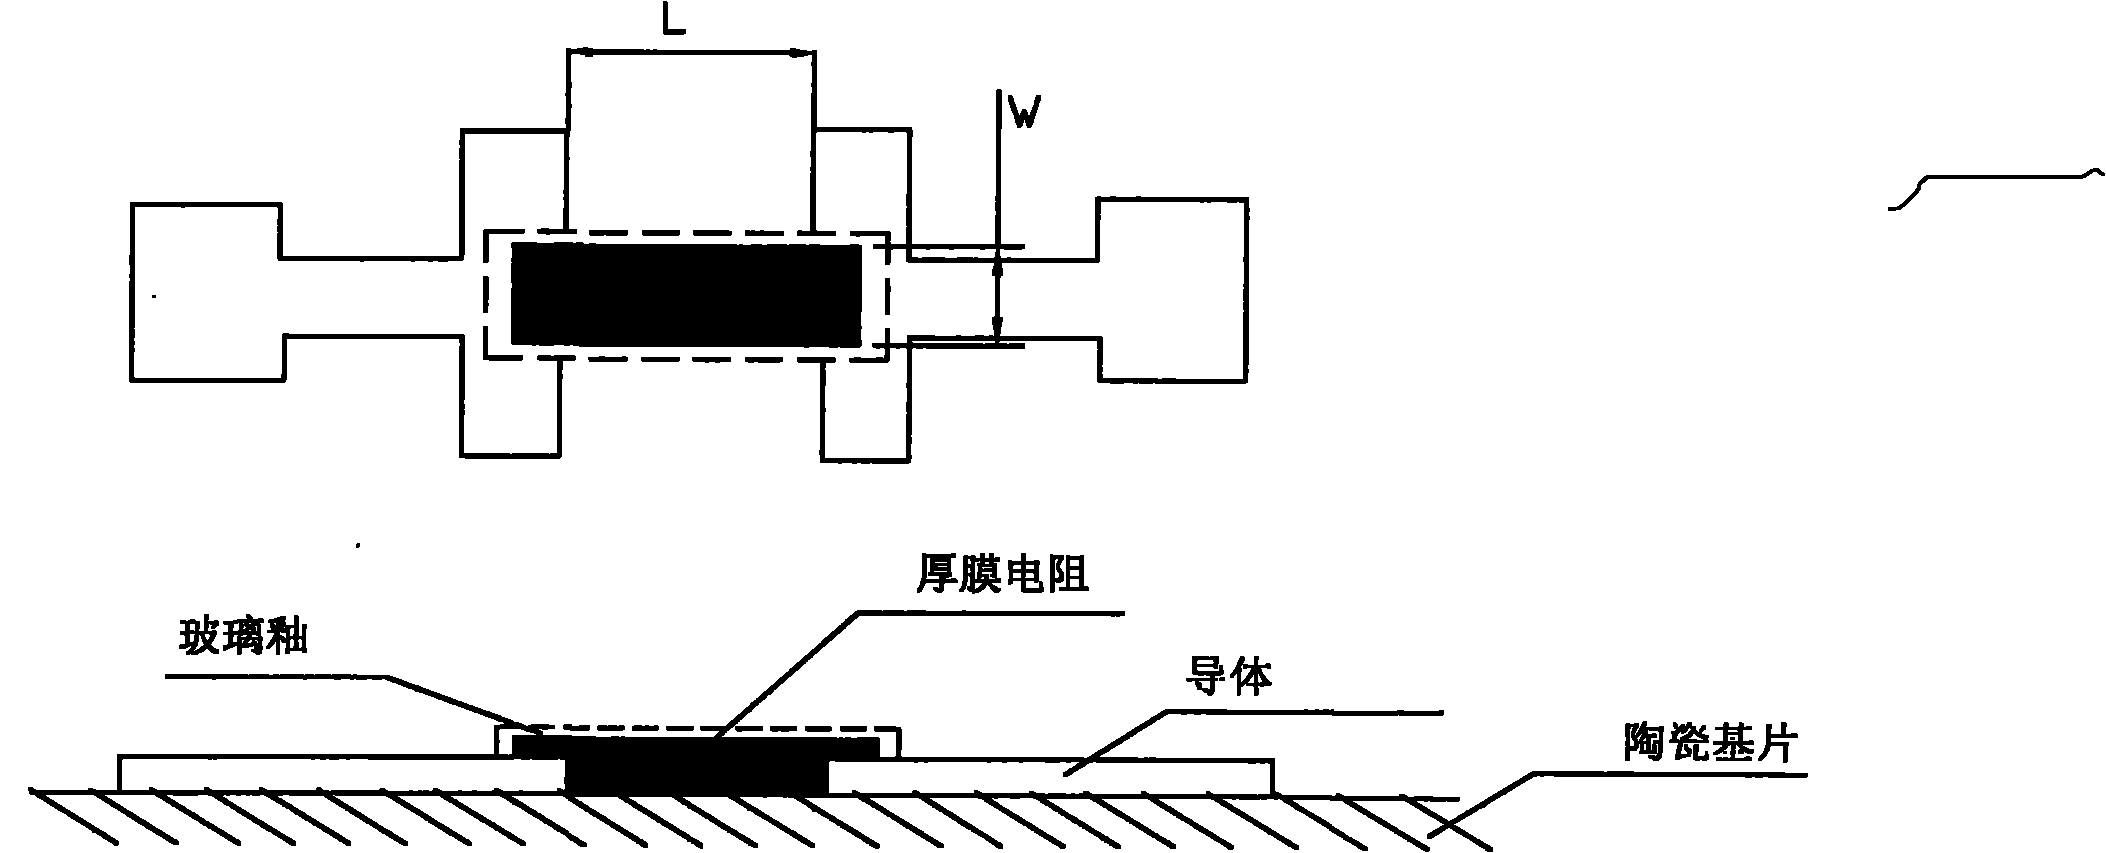 Thick-film resistor layout design device